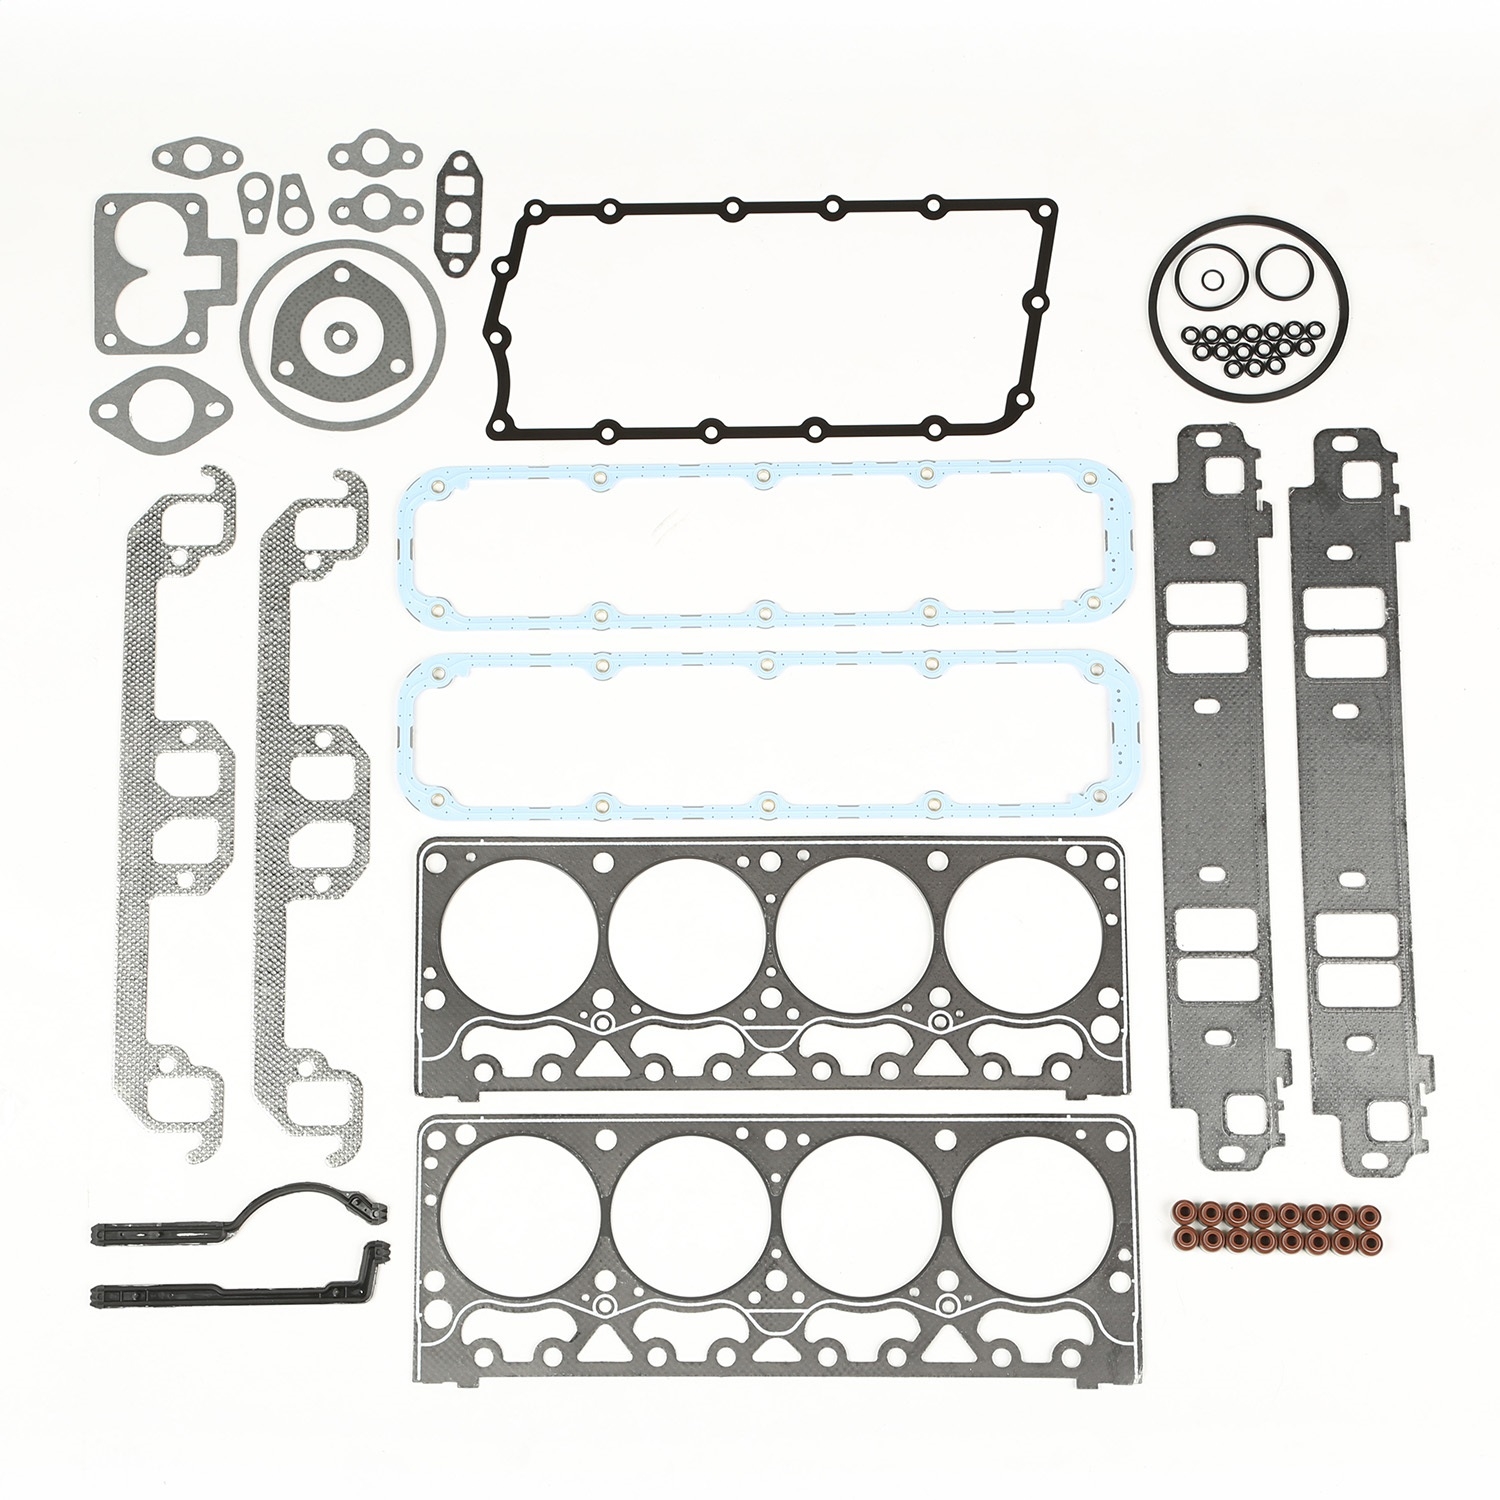 Omix This Upper Engine Gasket Set From Omix Fits 5.9L Engines Found In 97-98 Jeep Grand Cherokee.,